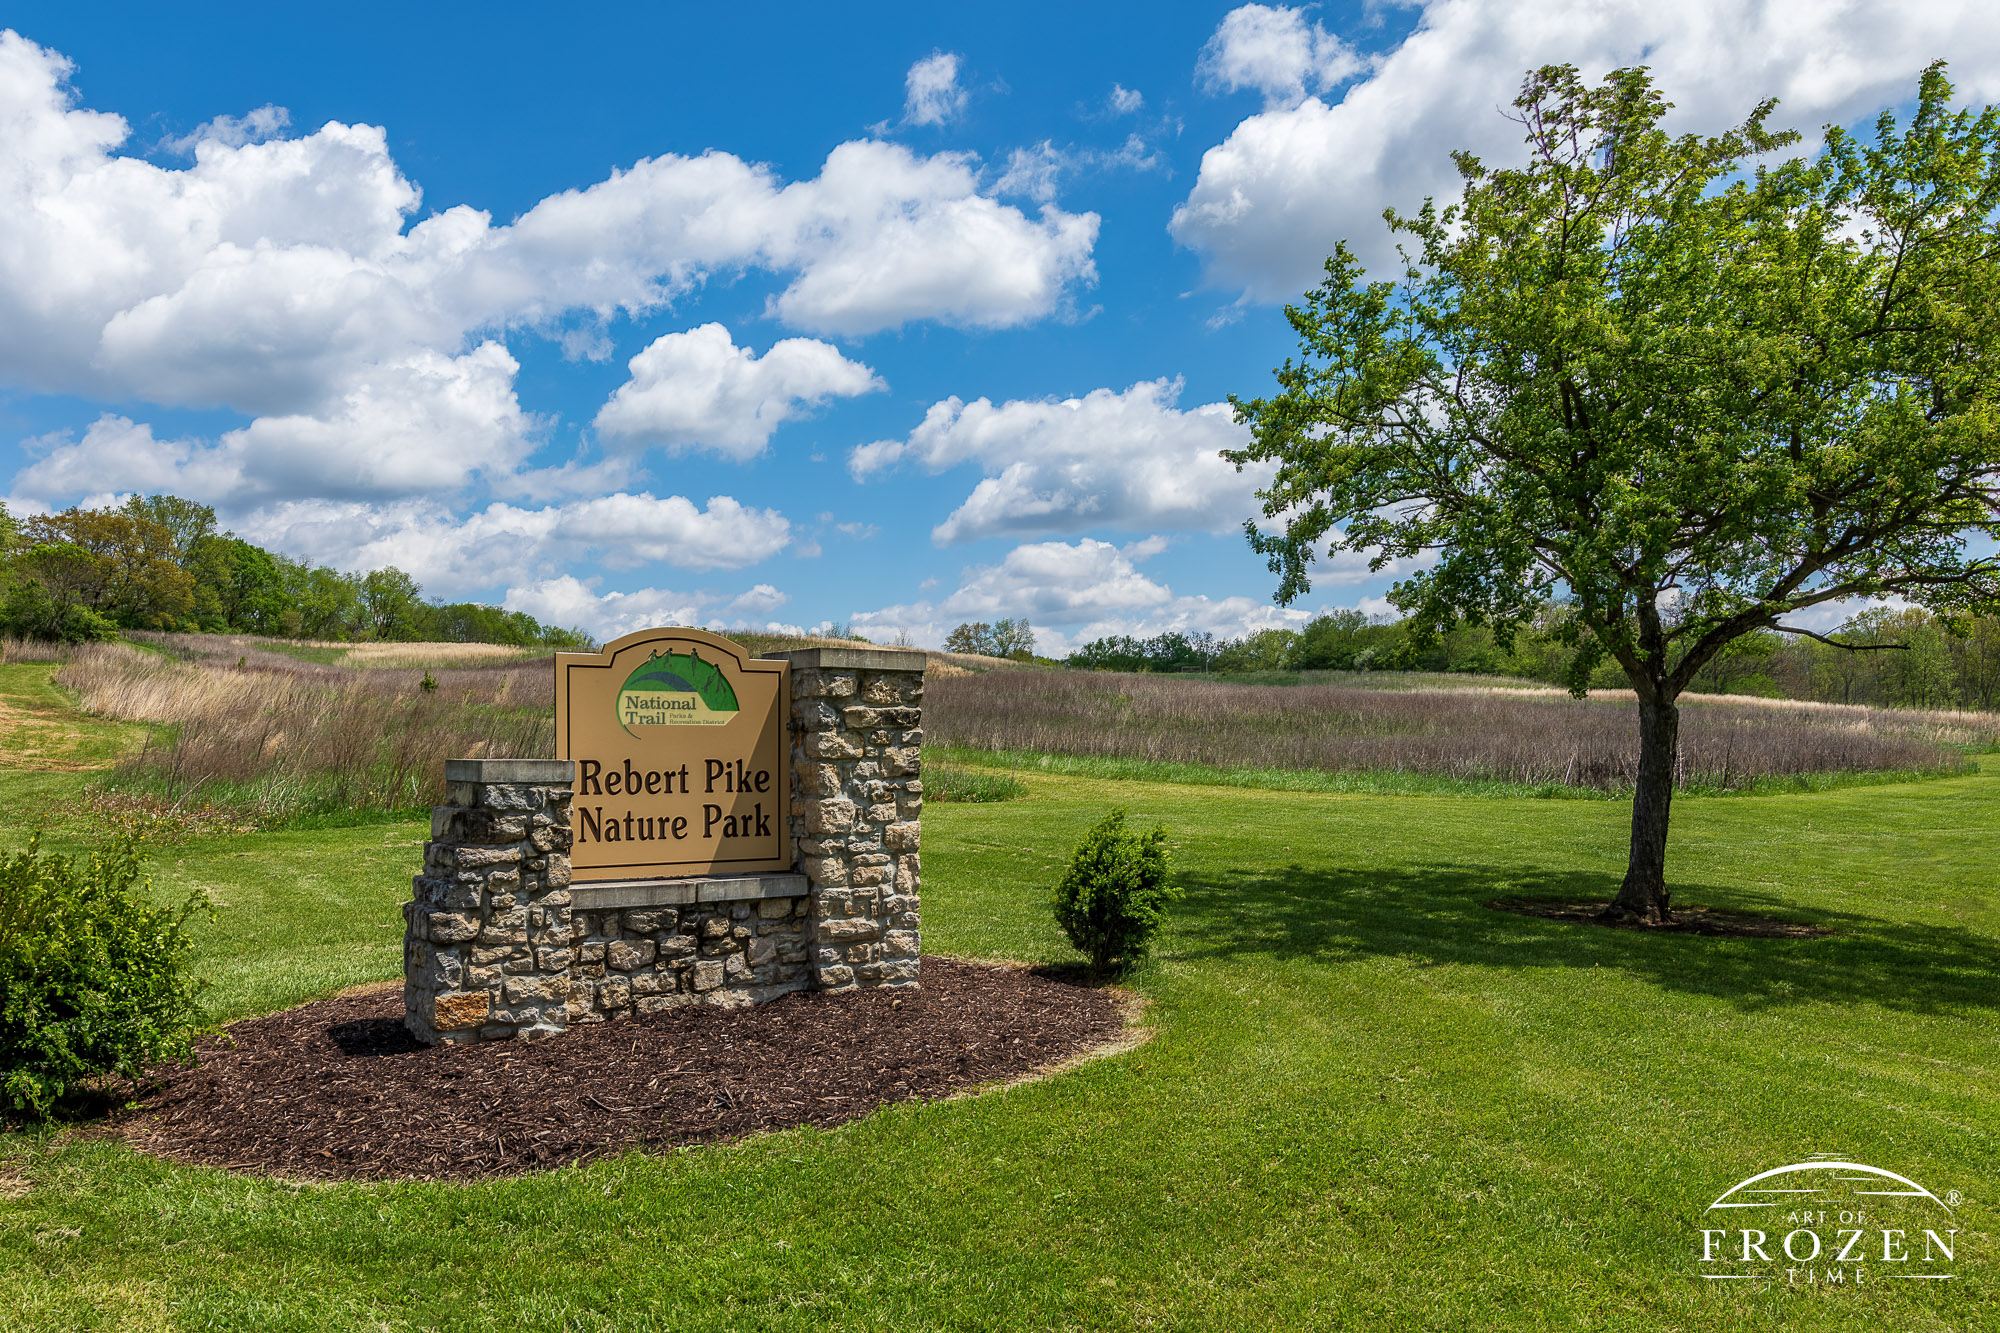 The Rebert Pike Nature Park entrance sign on a spring day under puffy clouds